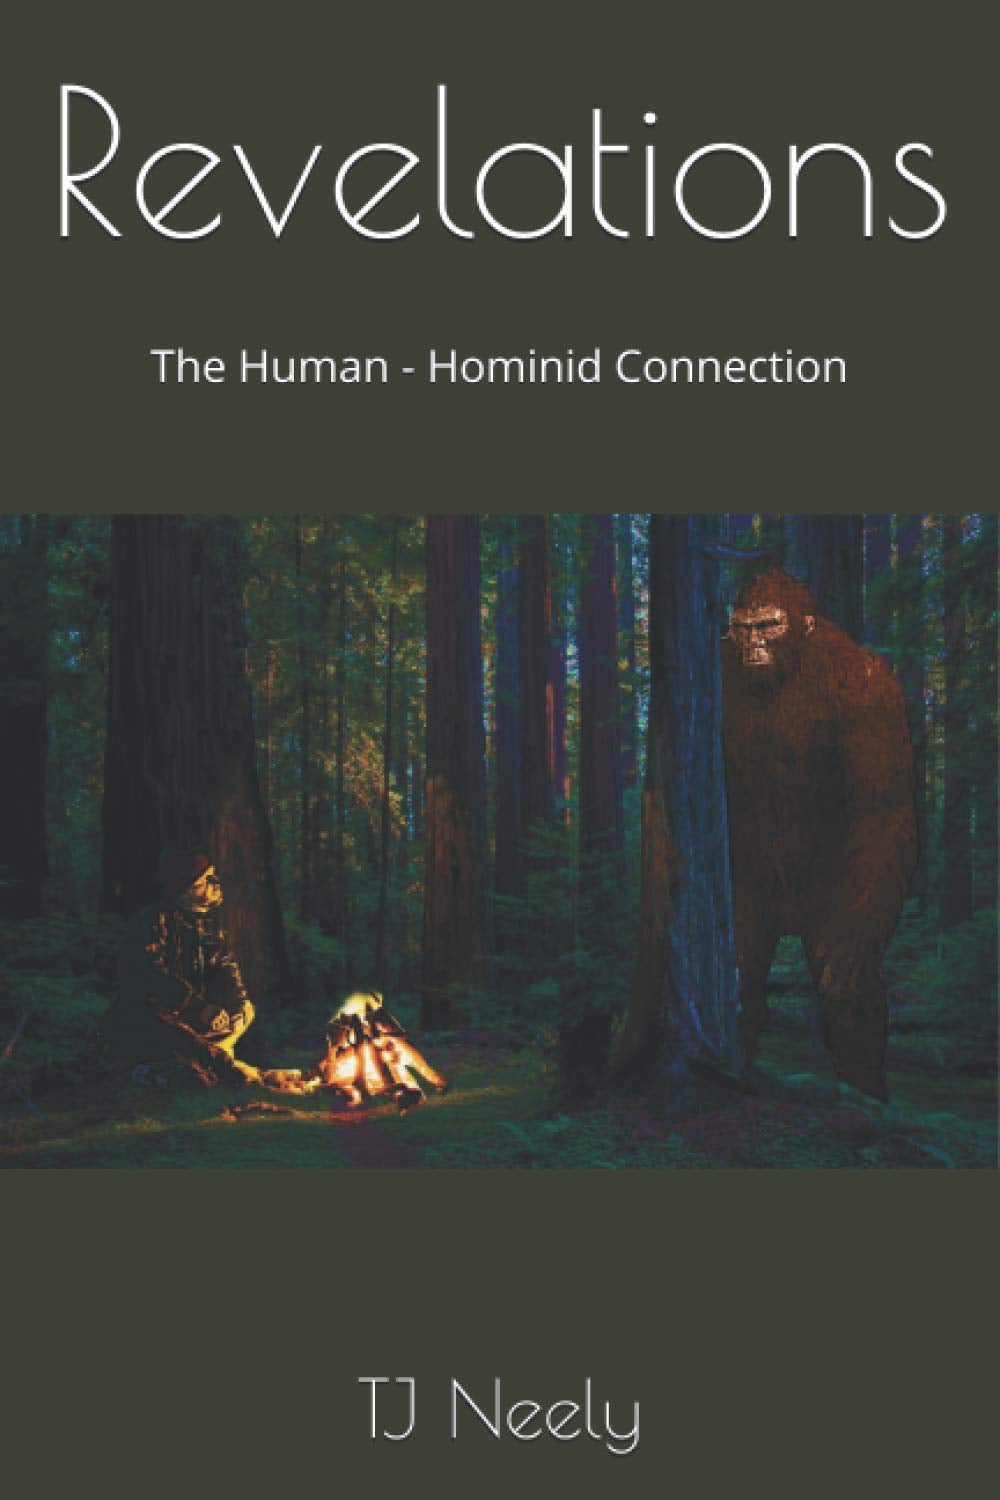 Revelations: the Human - Hominid Connection